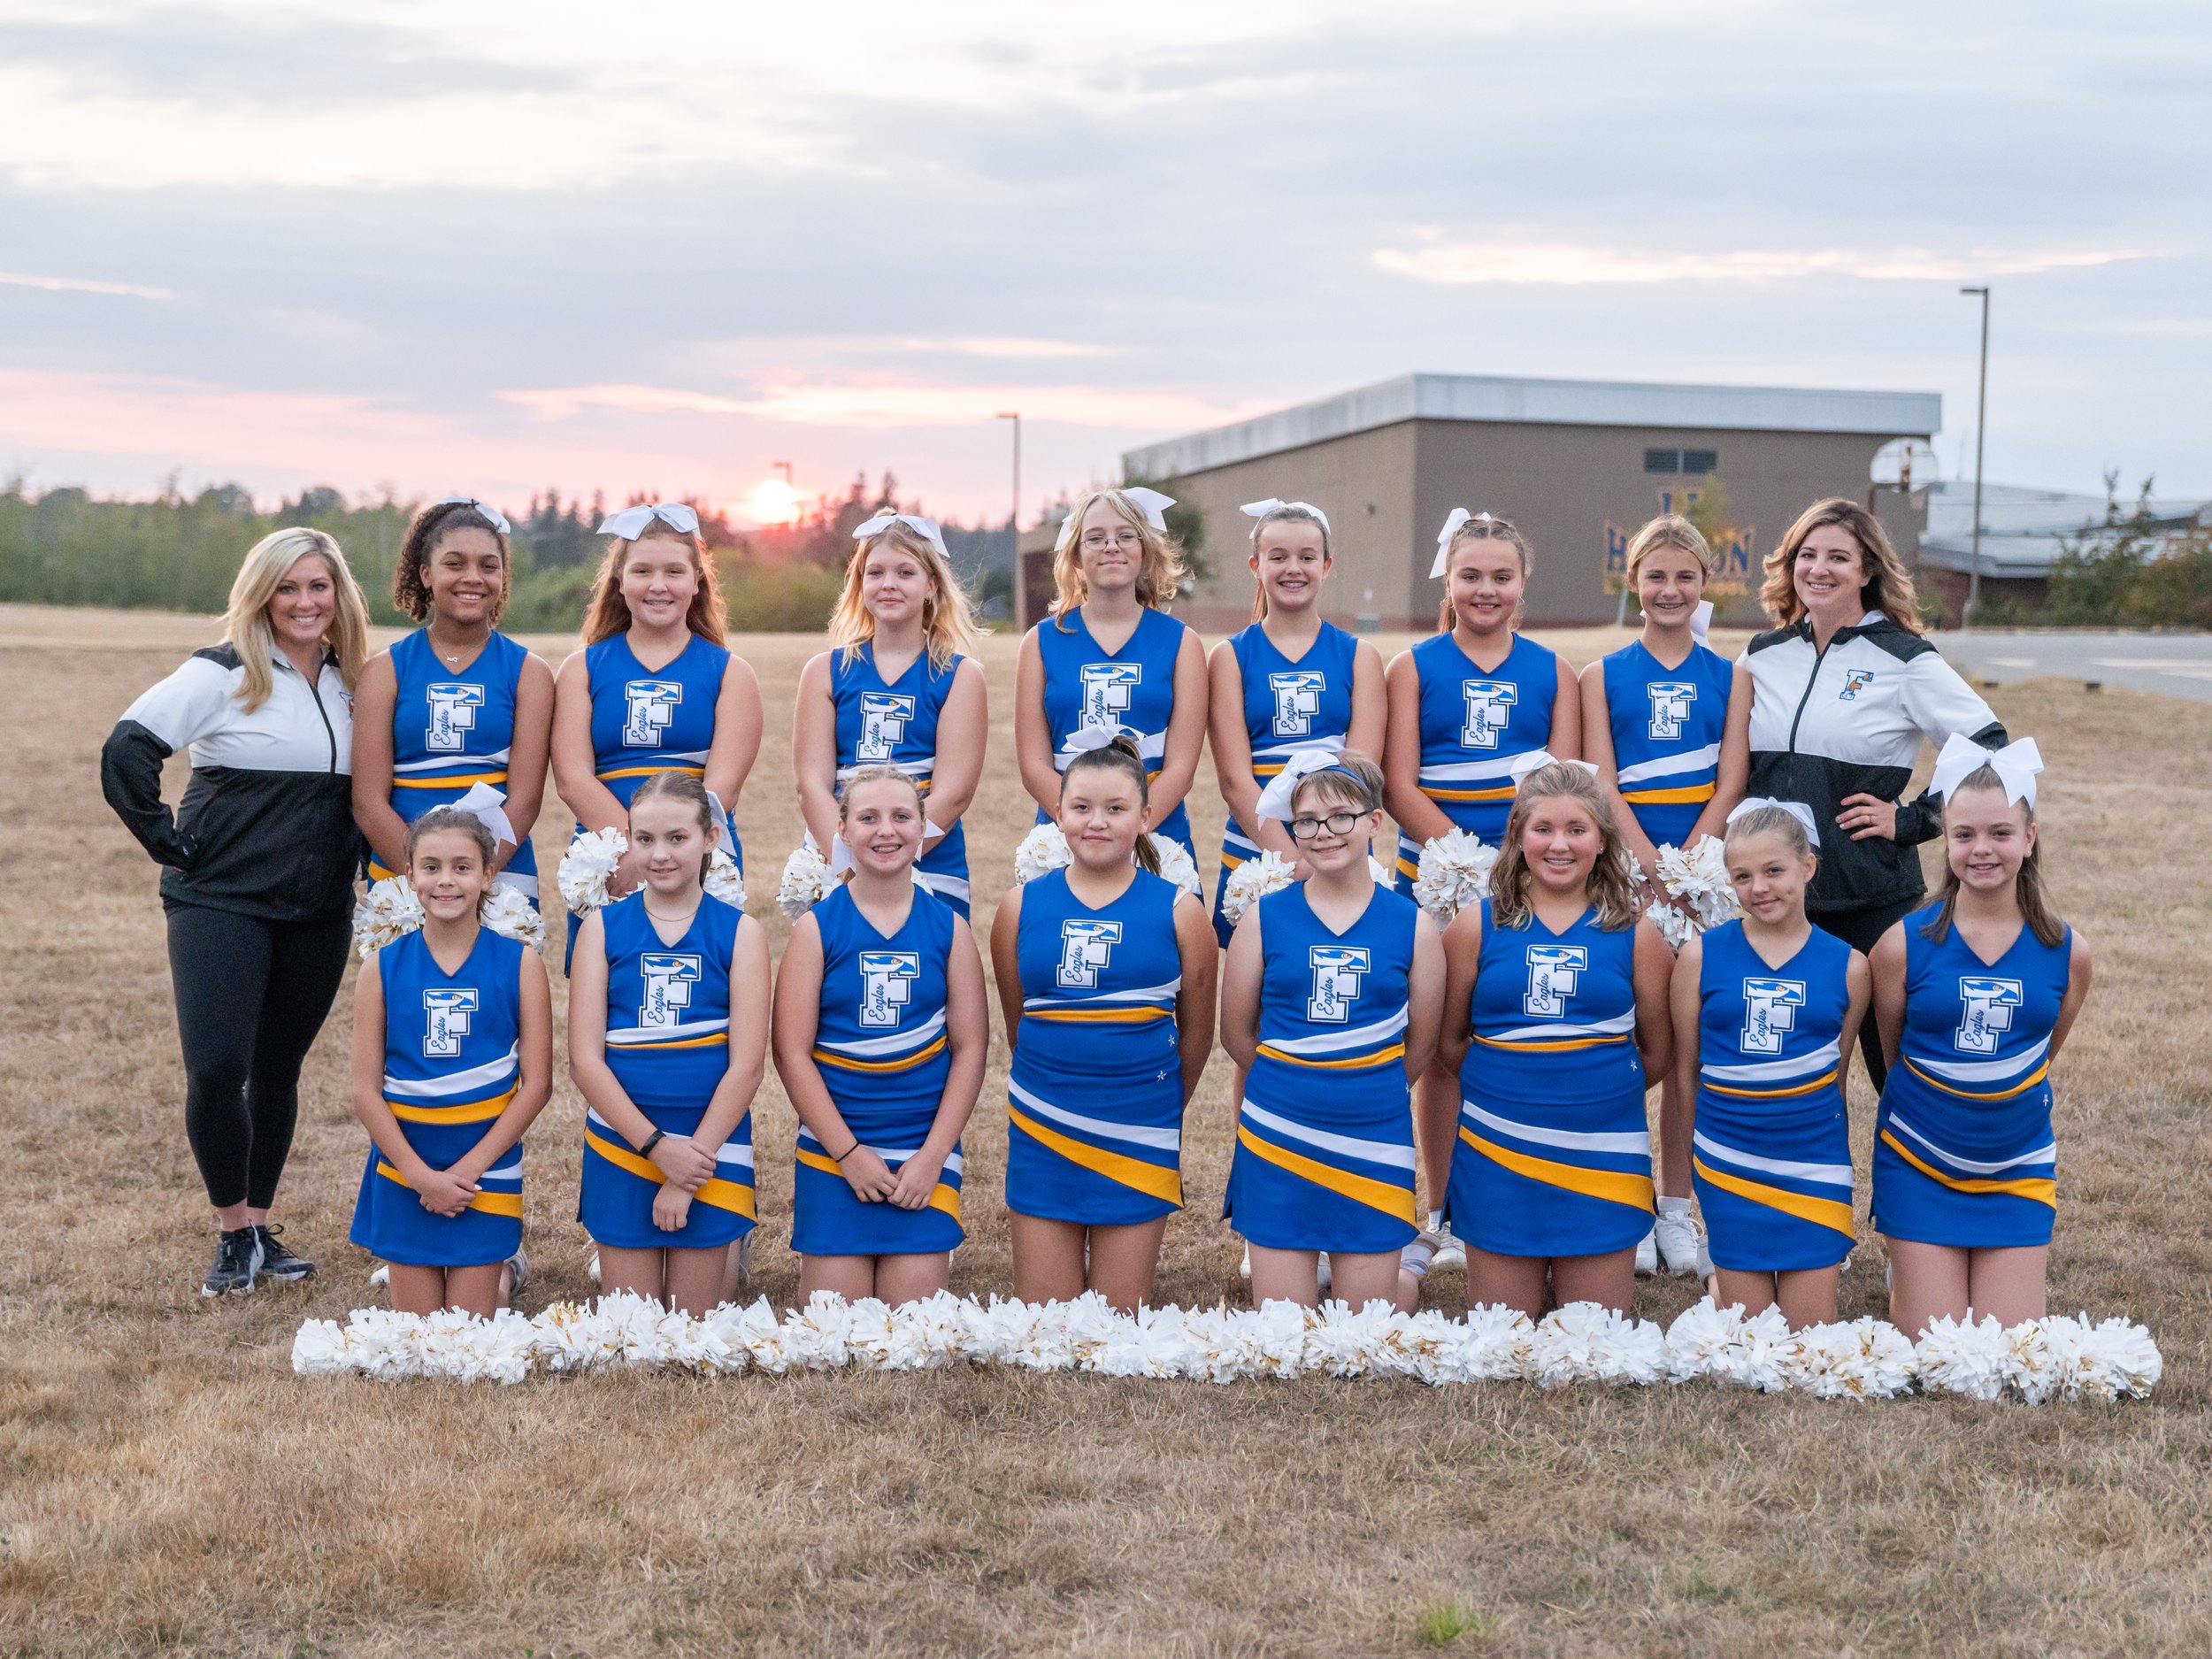 Holly Pike Team Photo (Middle Cheer).jpg